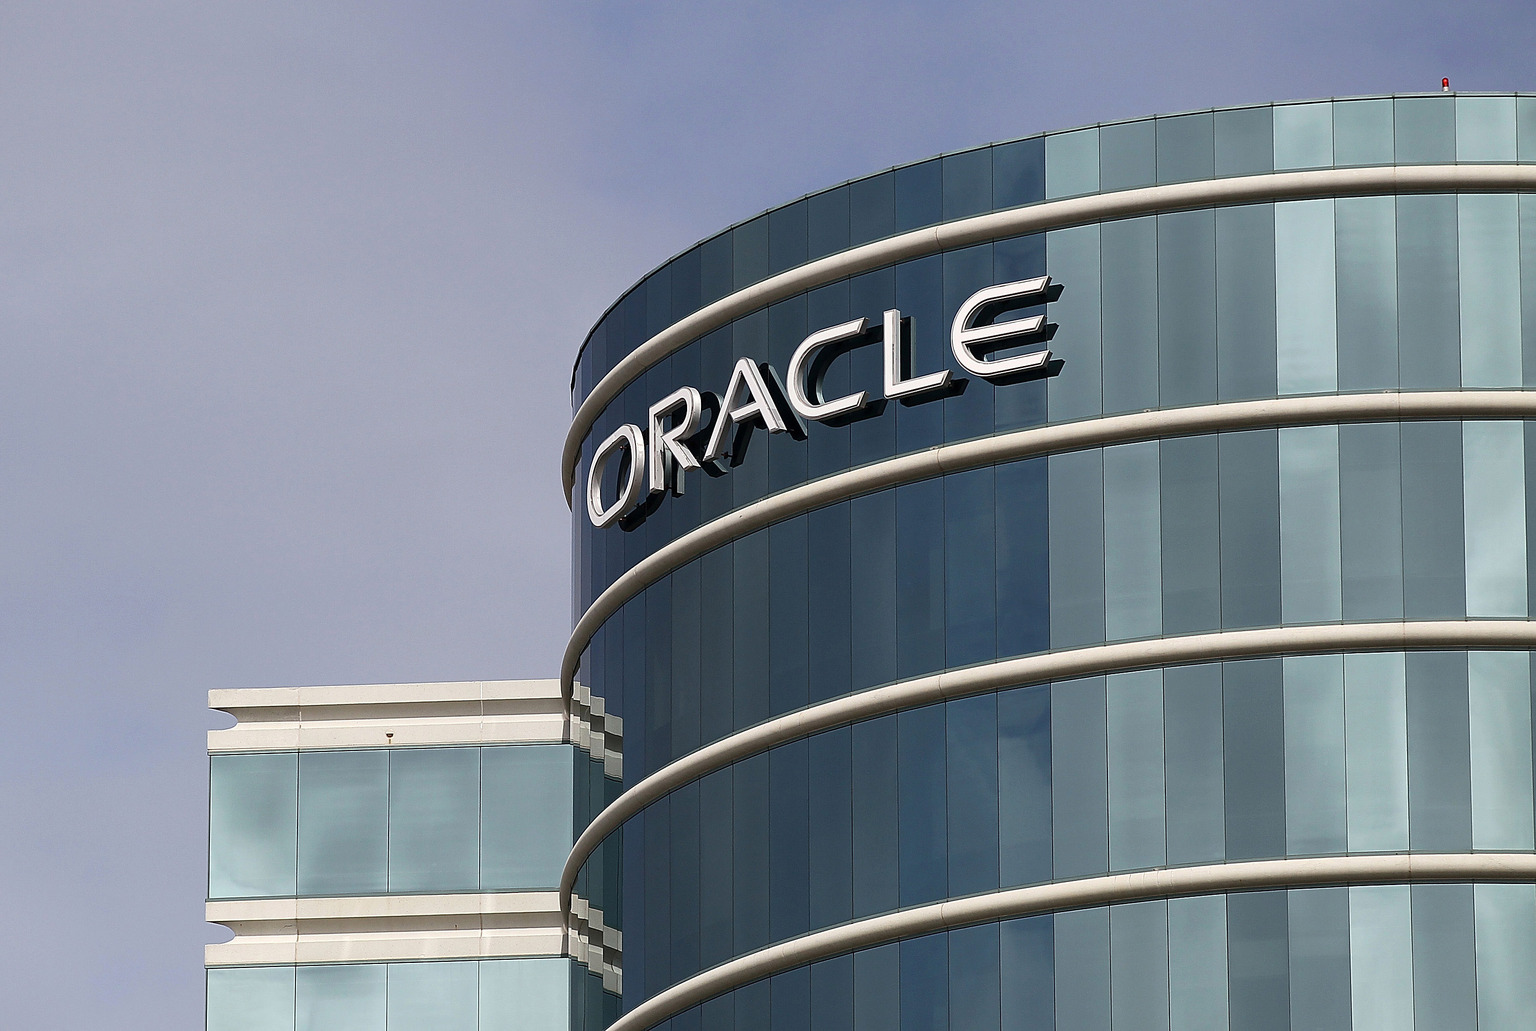 Watch out Amazon, Google and Microsoft: Oracle could be the fourth hyperscaler